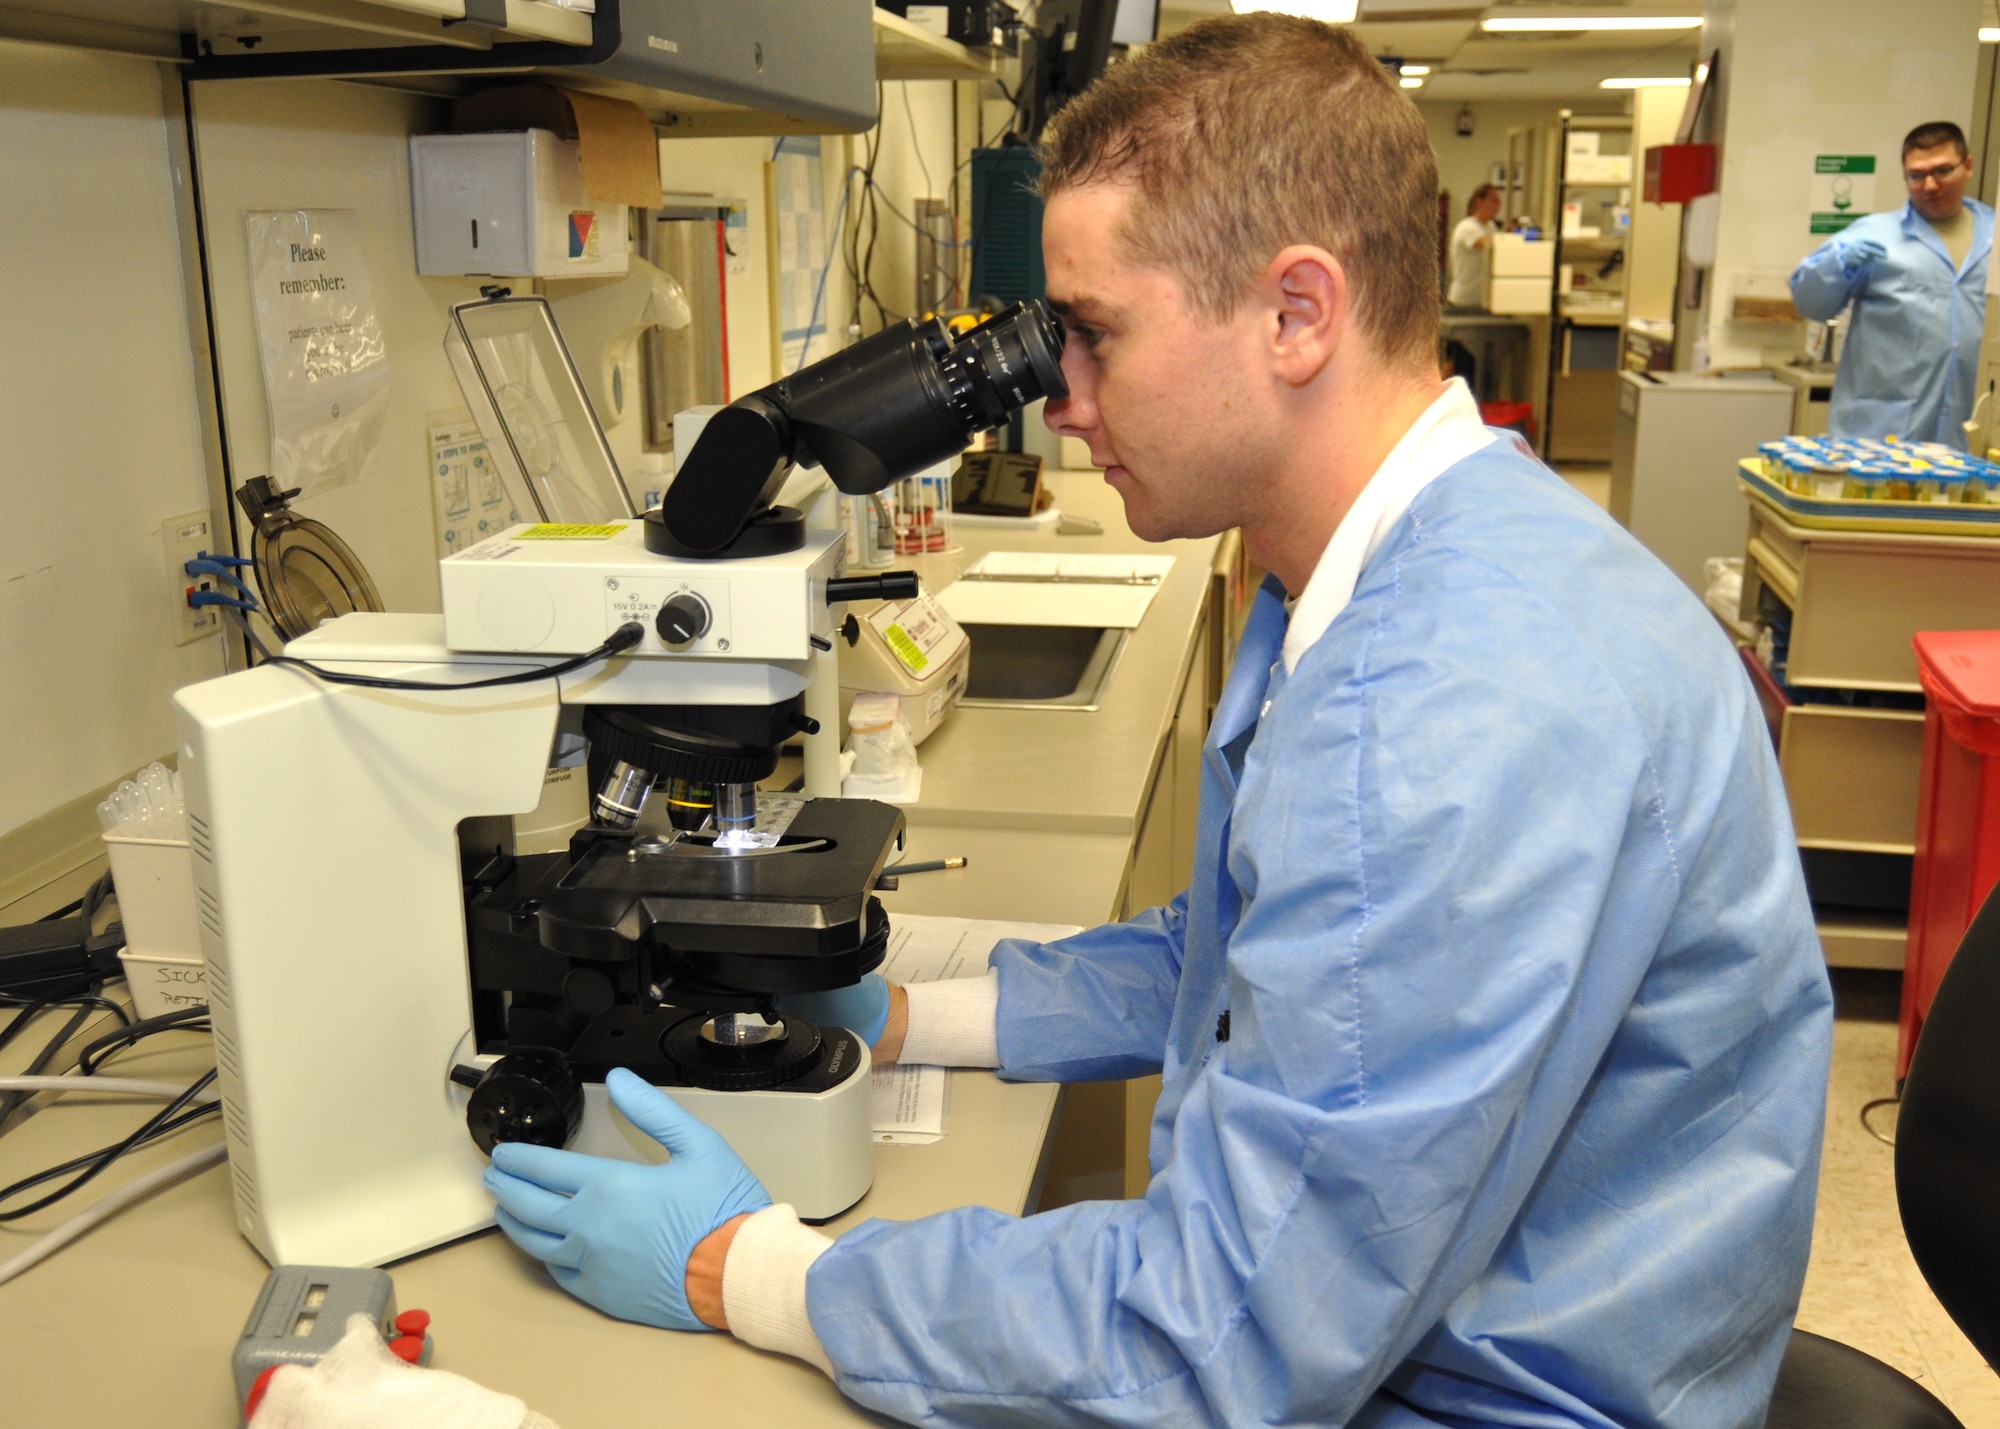 Clinical lab technician Senior Airman Christopher Boyd, 81st Diagnostics and Therapeutics Squadron, uses a microscope to examine a stained blood slide for abnormal cells at the Keesler Hospital, Keesler Air Force Base, Miss. Identification of abnormal cells could aid providers in diagnosing patients with various conditions like anemia or even cancer. Boyd was one of the many lab technicians honored for National Medical Laboratory Professionals Week April 22-28, 2012.  (U.S. Air Force photo by Steve Pivnick)